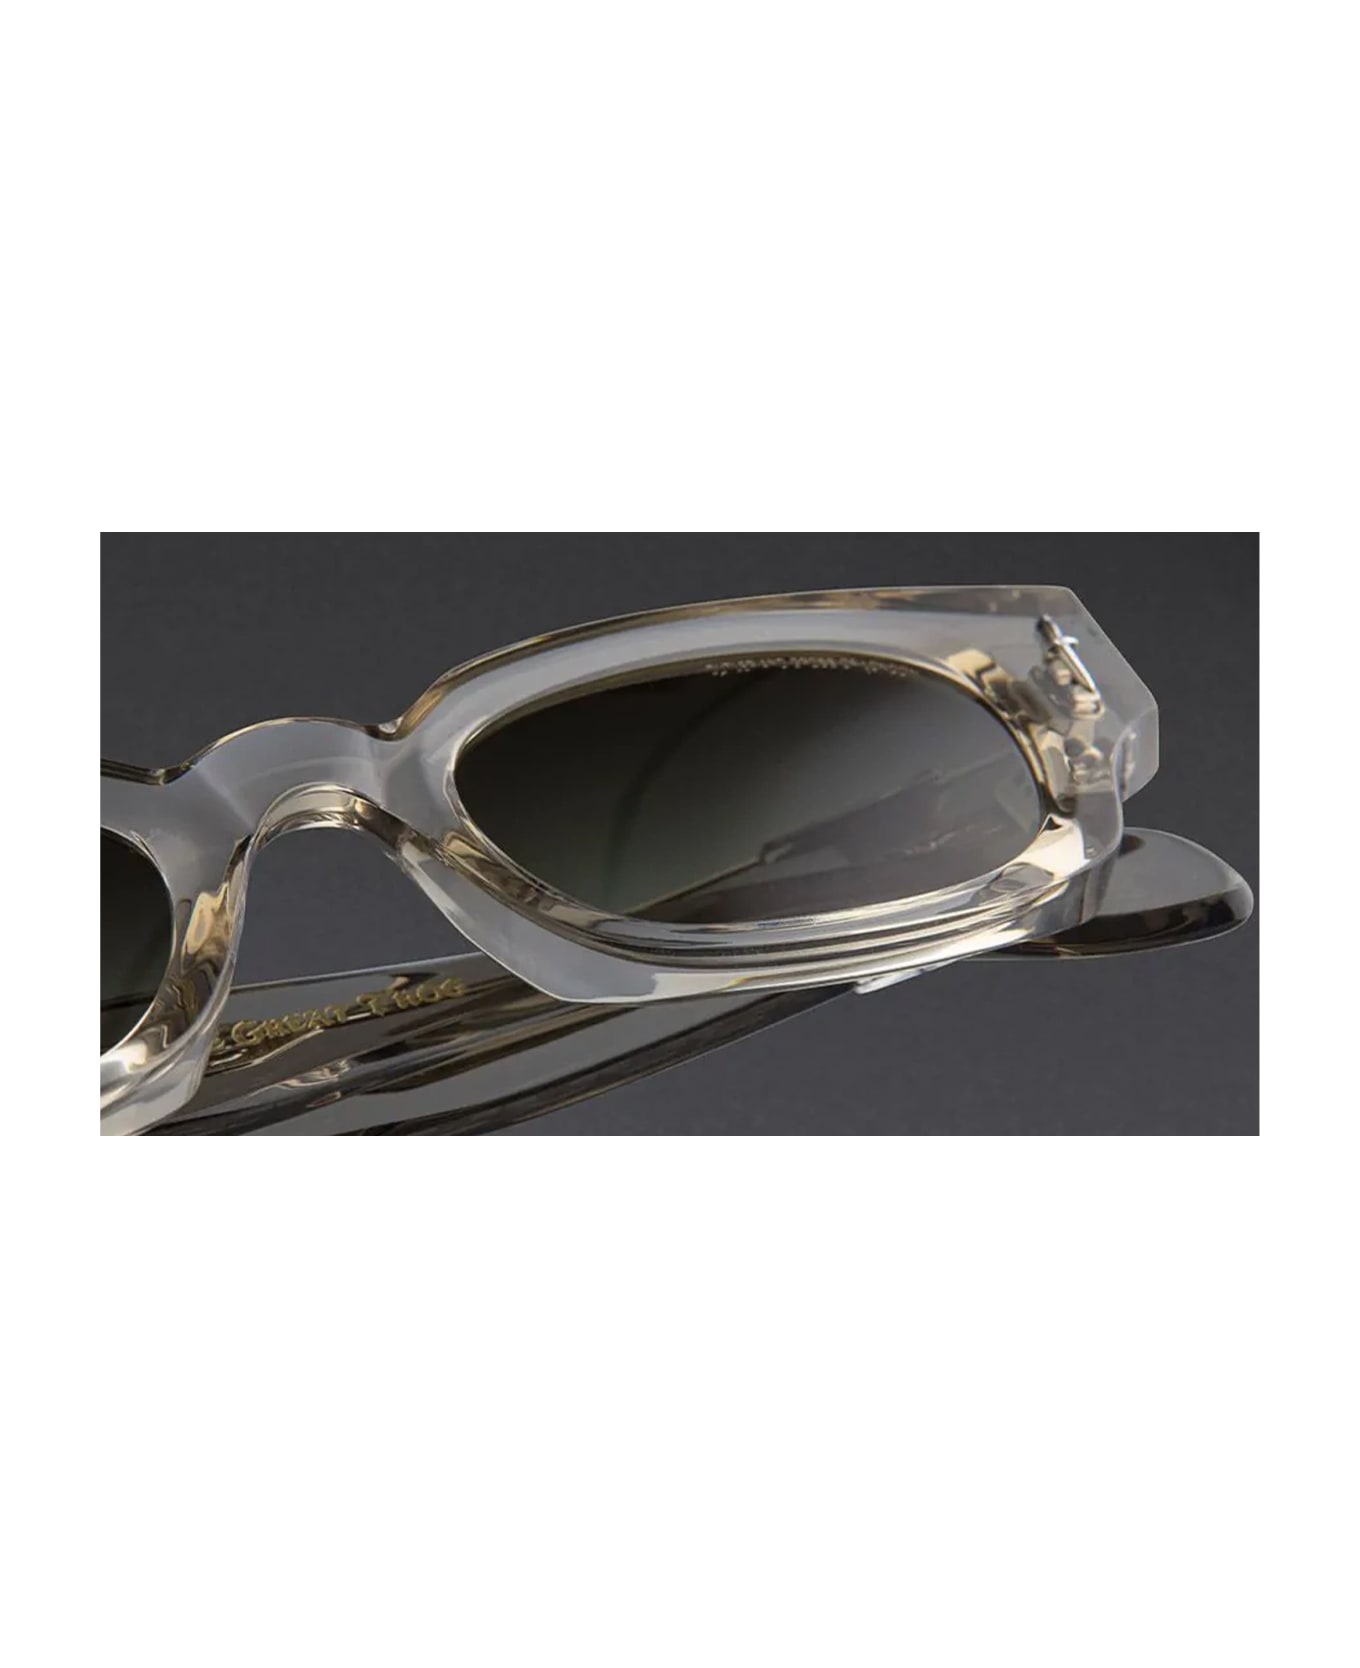 Cutler and Gross The Great Frog - Soaring Eagle / Sand Crystal Sunglasses - transparent beige サングラス